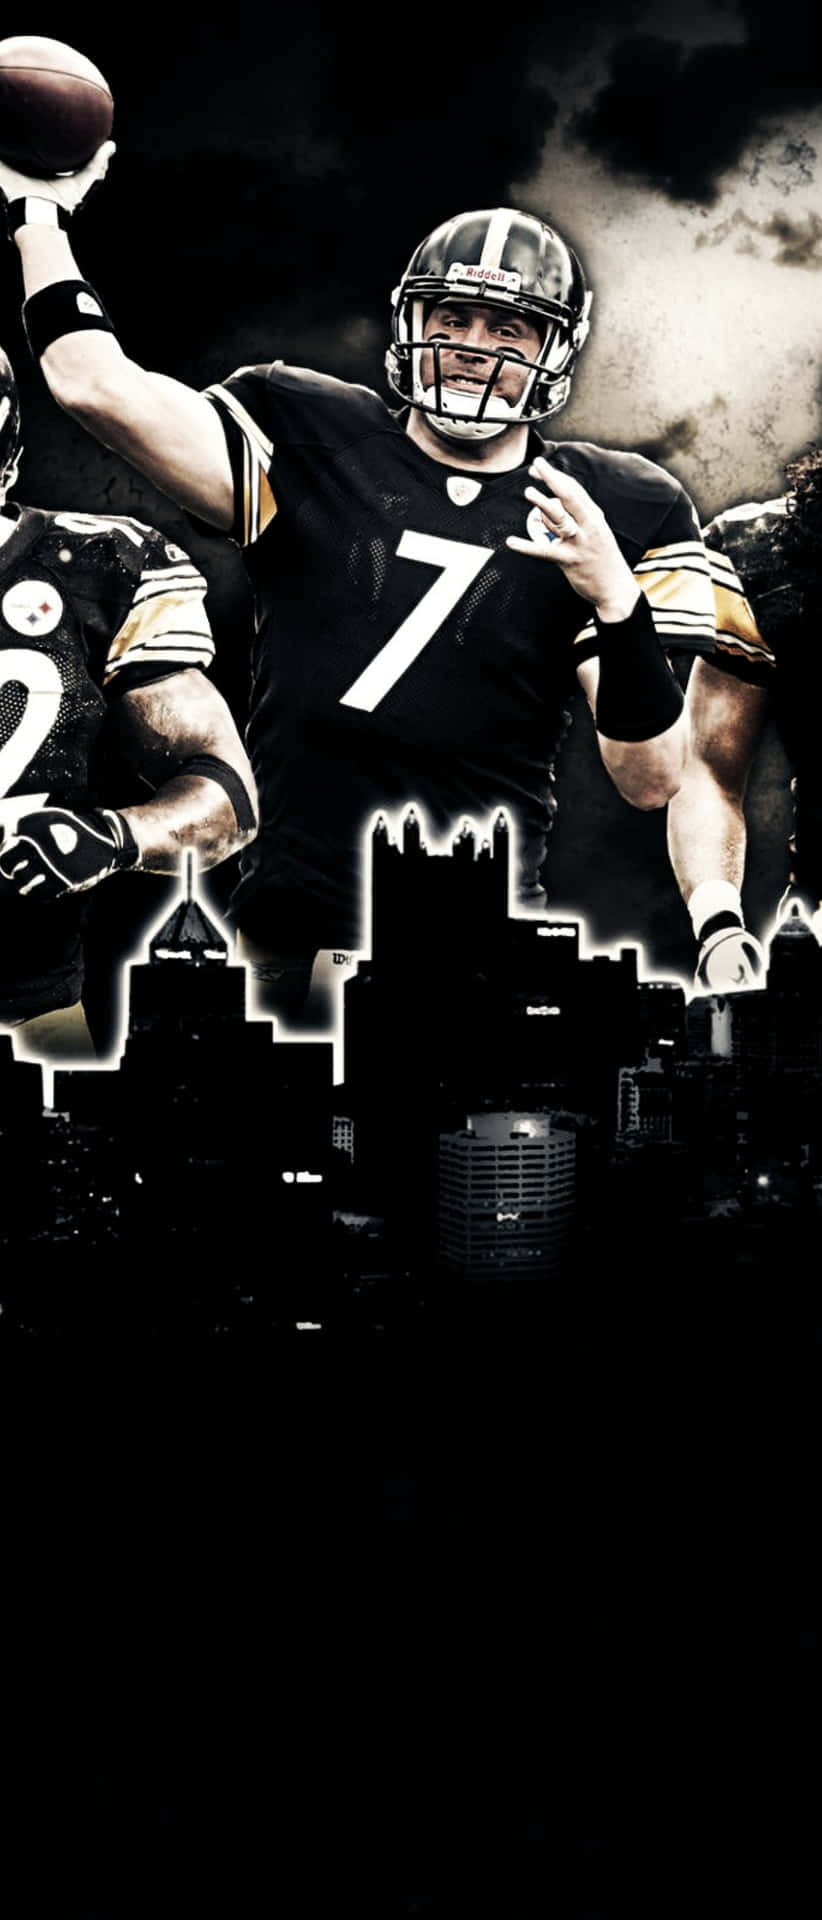 Get ready for football season with the official Steelers iPhone Wallpaper